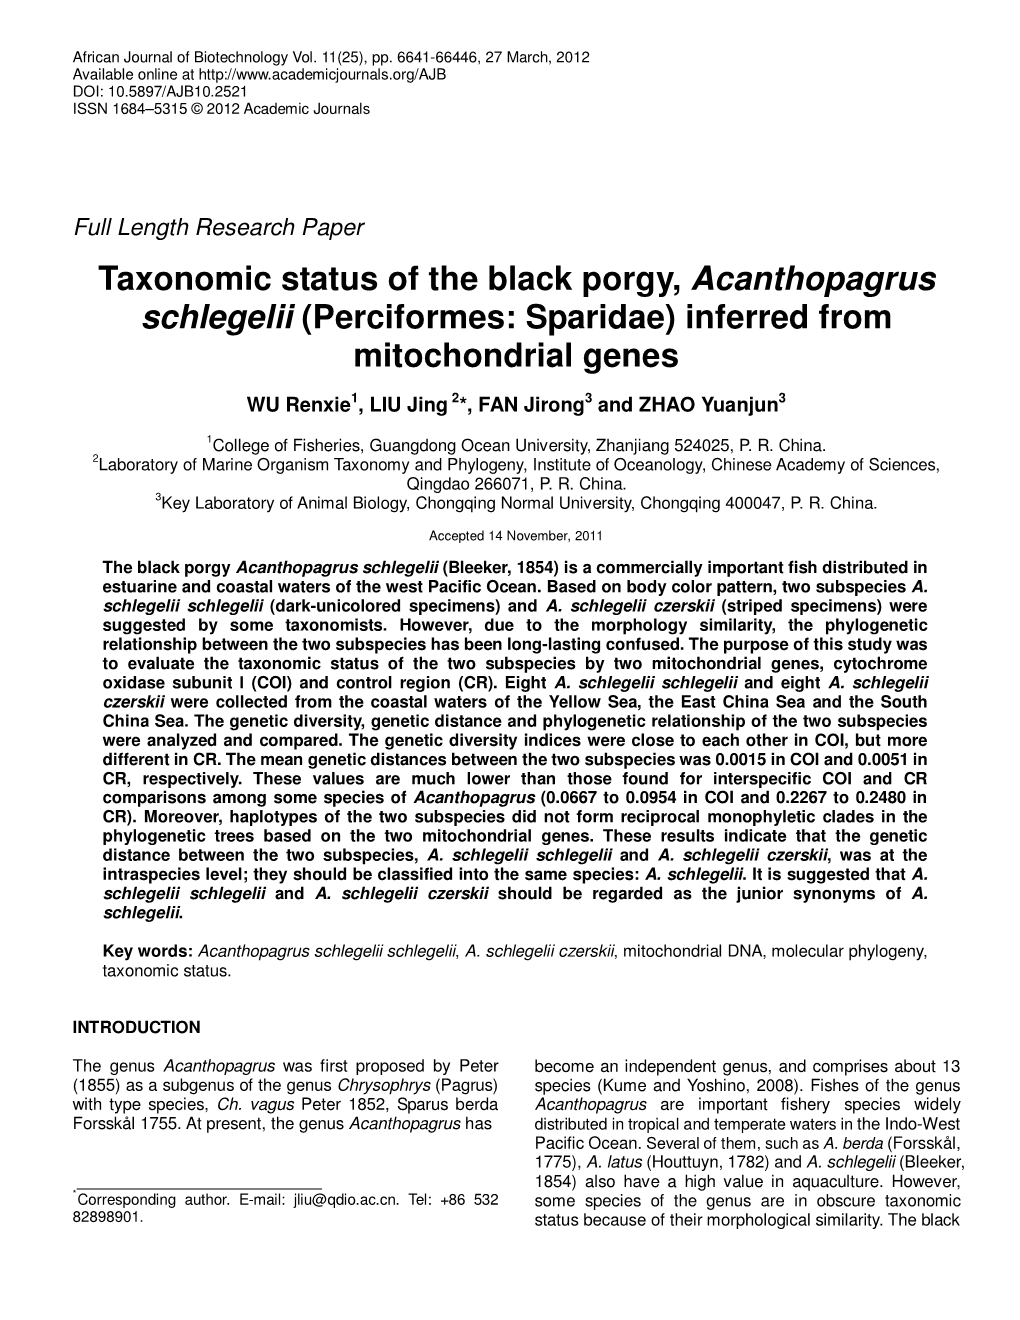 Taxonomic Status of the Black Porgy, Acanthopagrus Schlegelii (Perciformes: Sparidae) Inferred from Mitochondrial Genes